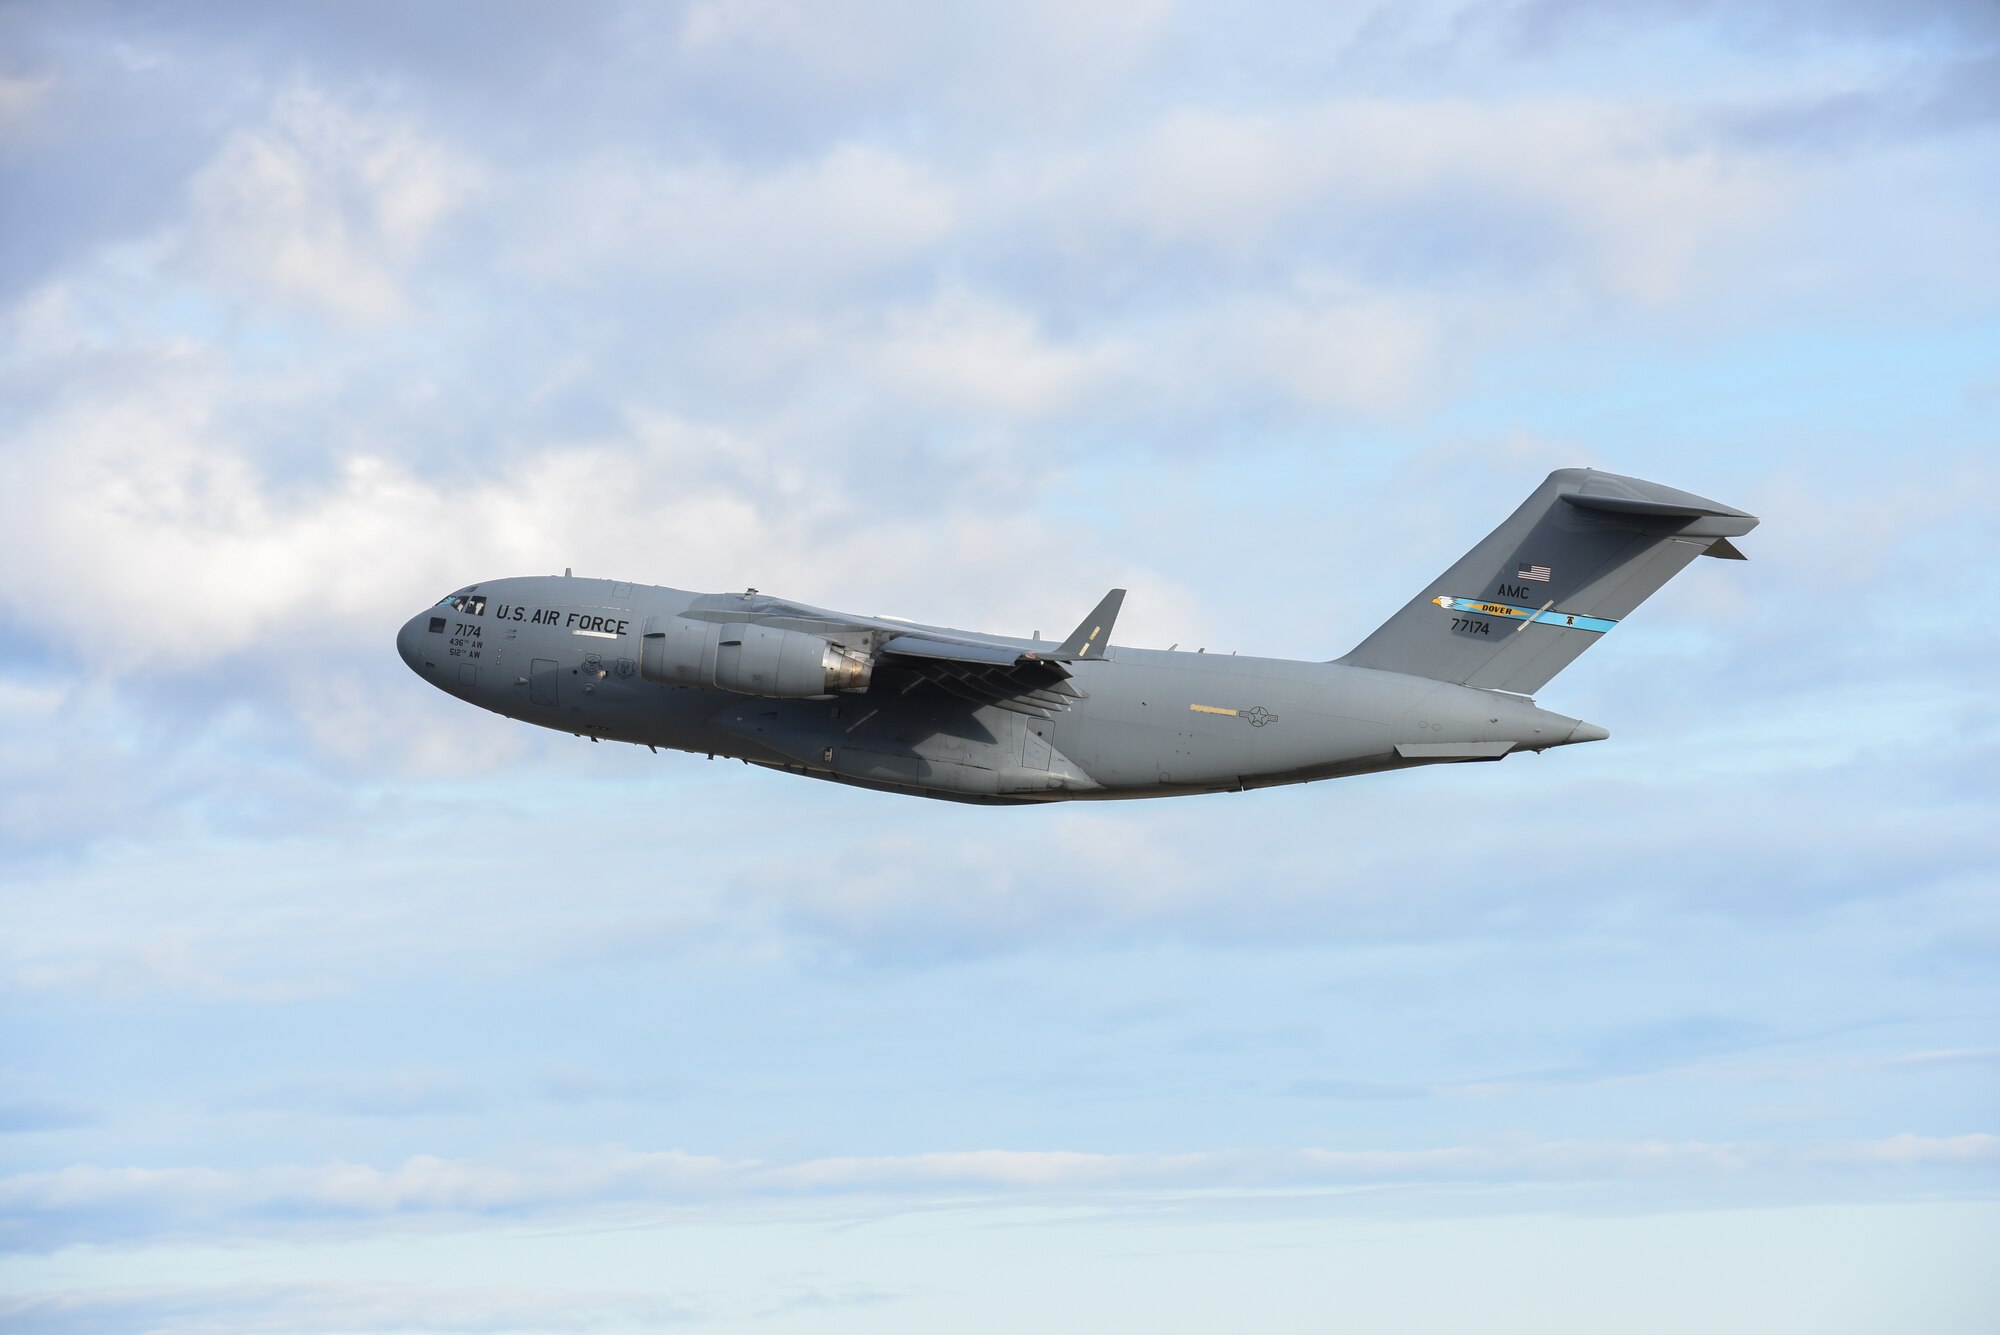 A C-17 Globemaster III takes off during exercise Mobility Guardian 2019